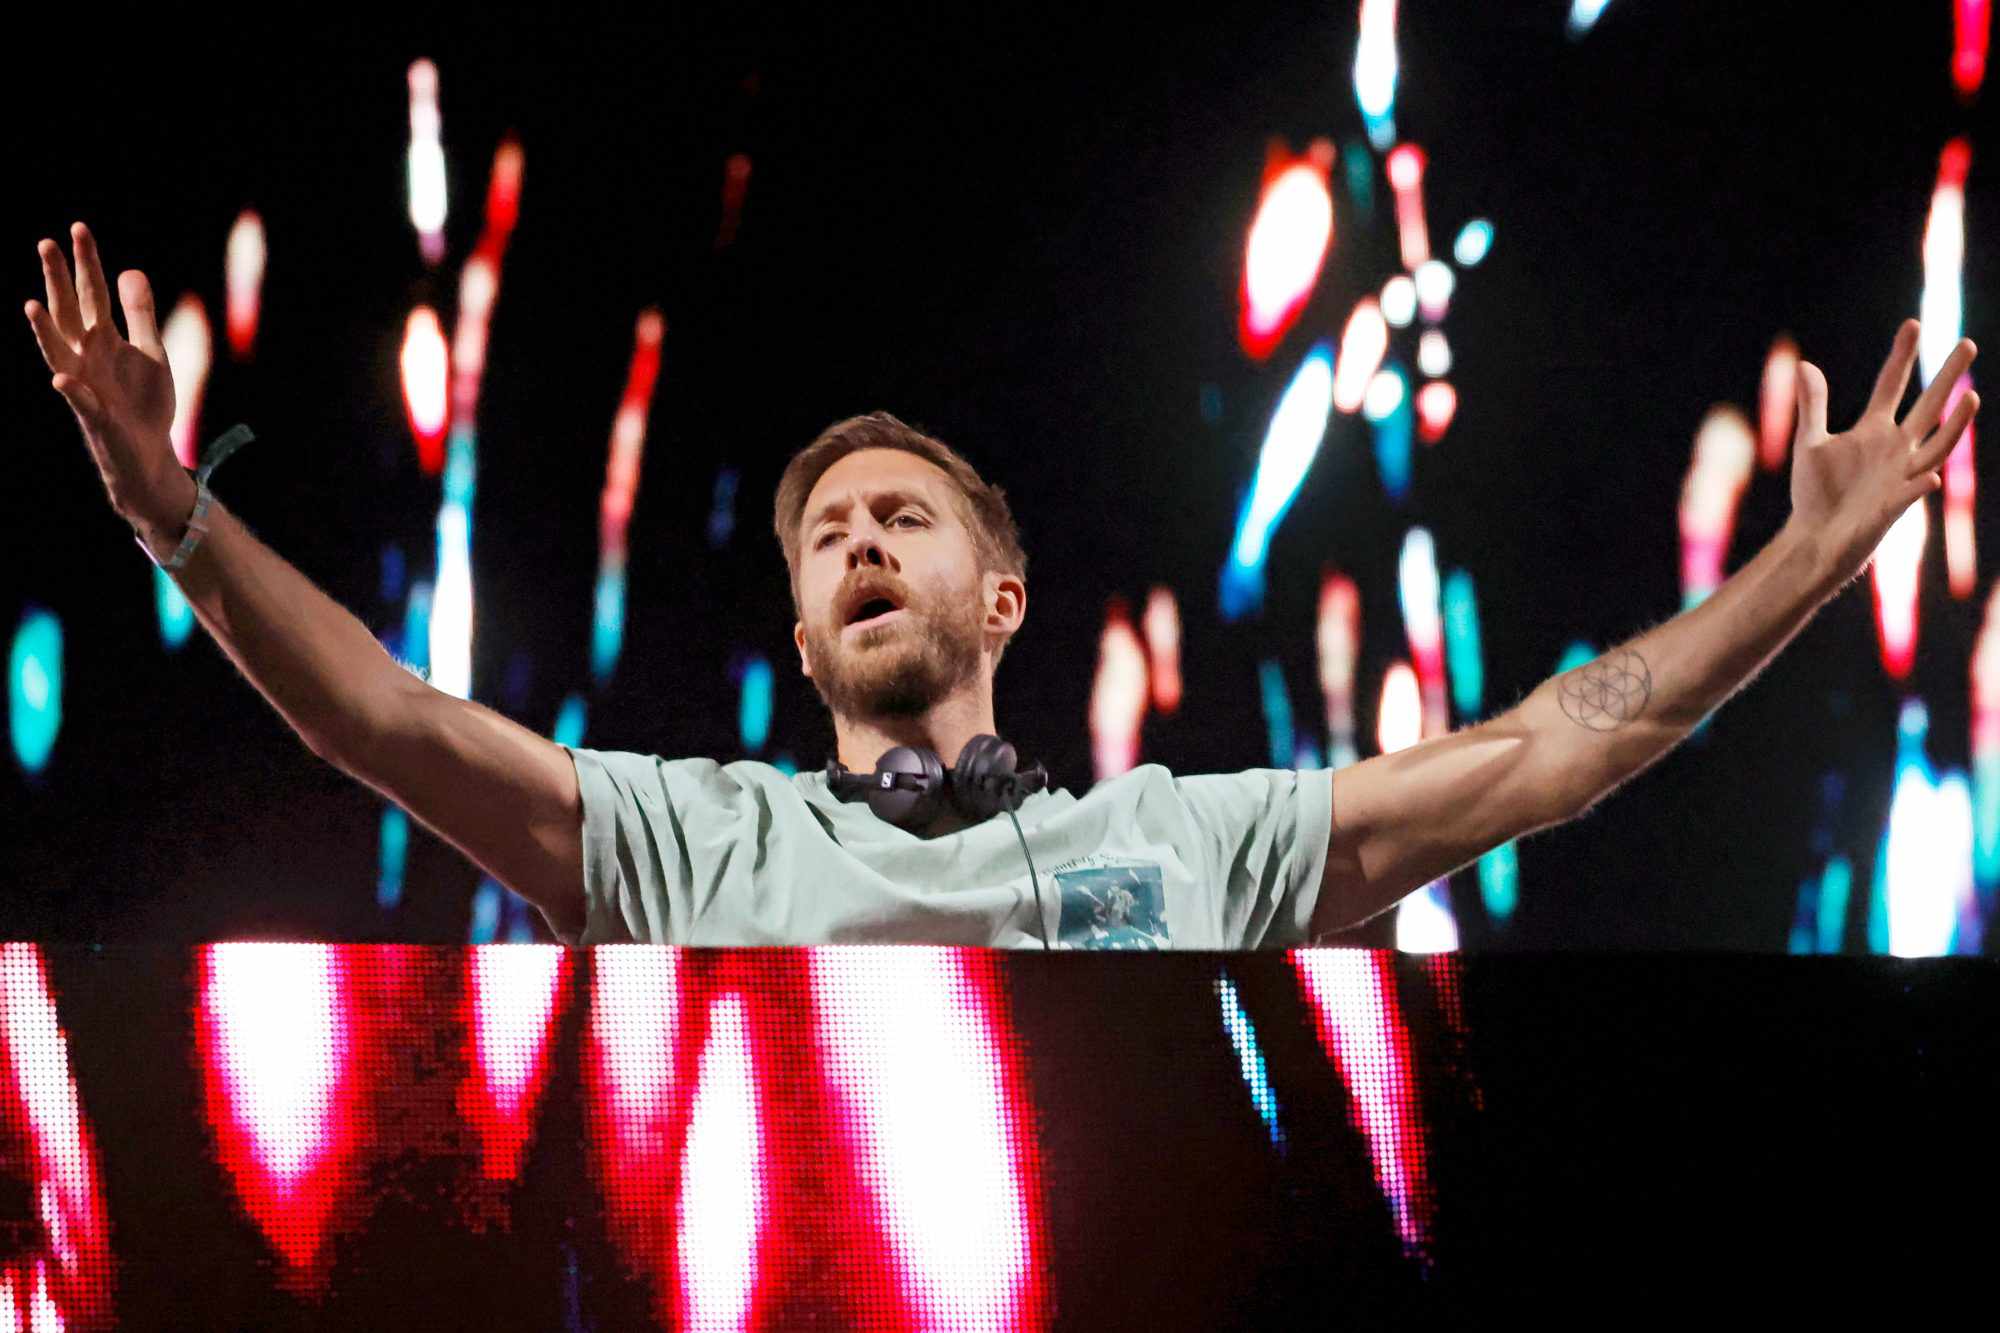 INDIO, CALIFORNIA - APRIL 15: Calvin Harris performs at the Coachella Stage during the 2023 Coachella Valley Music and Arts Festival on April 15, 2023 in Indio, California. (Photo by Frazer Harrison/Getty Images for Coachella)